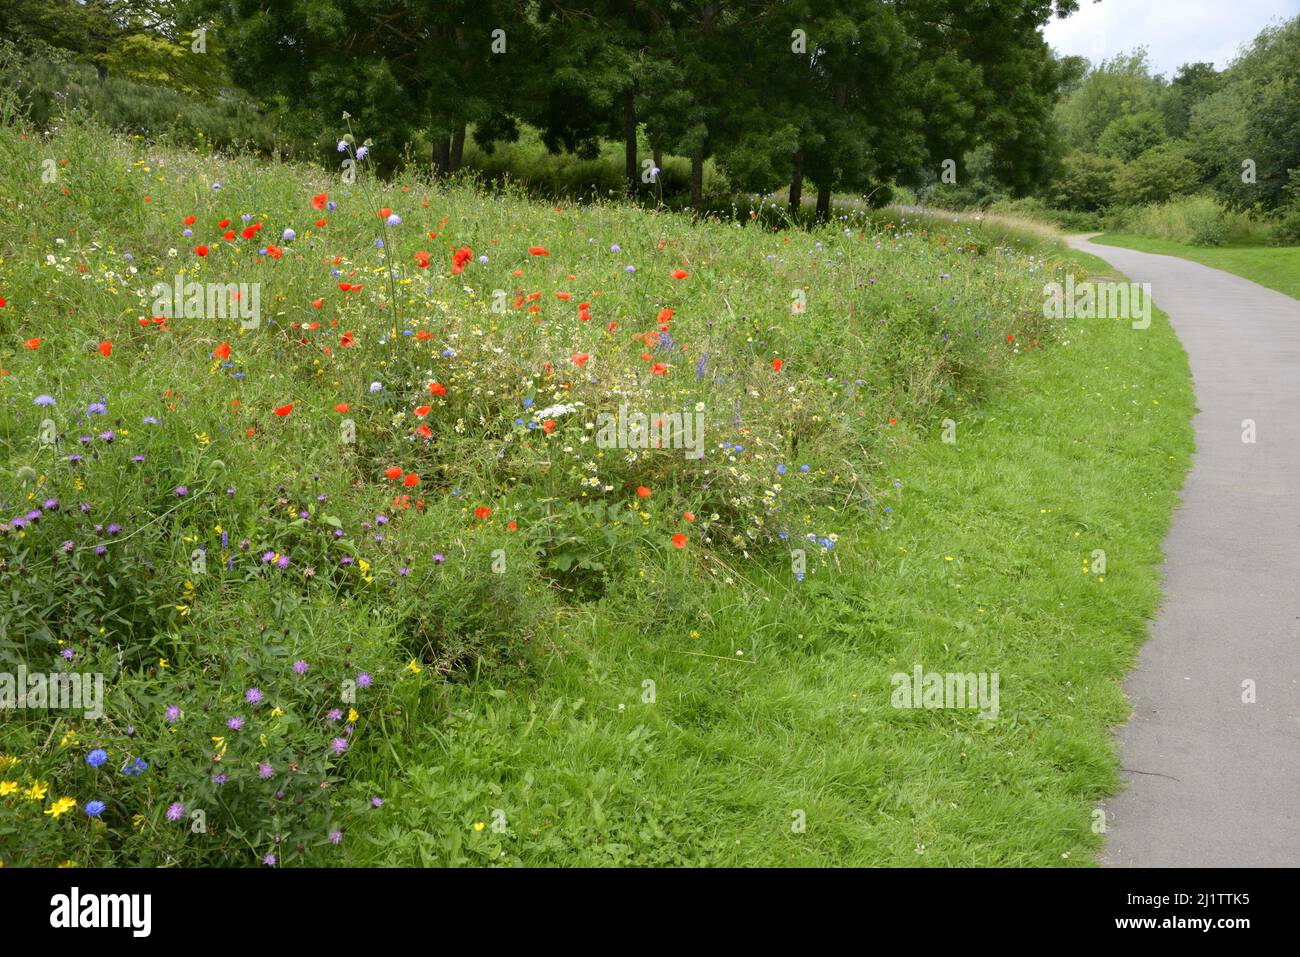 Wild flower meadow with red poppies, daisies and cornflowers, July: Watman park, Maidstone, Kent, UK. Stock Photo